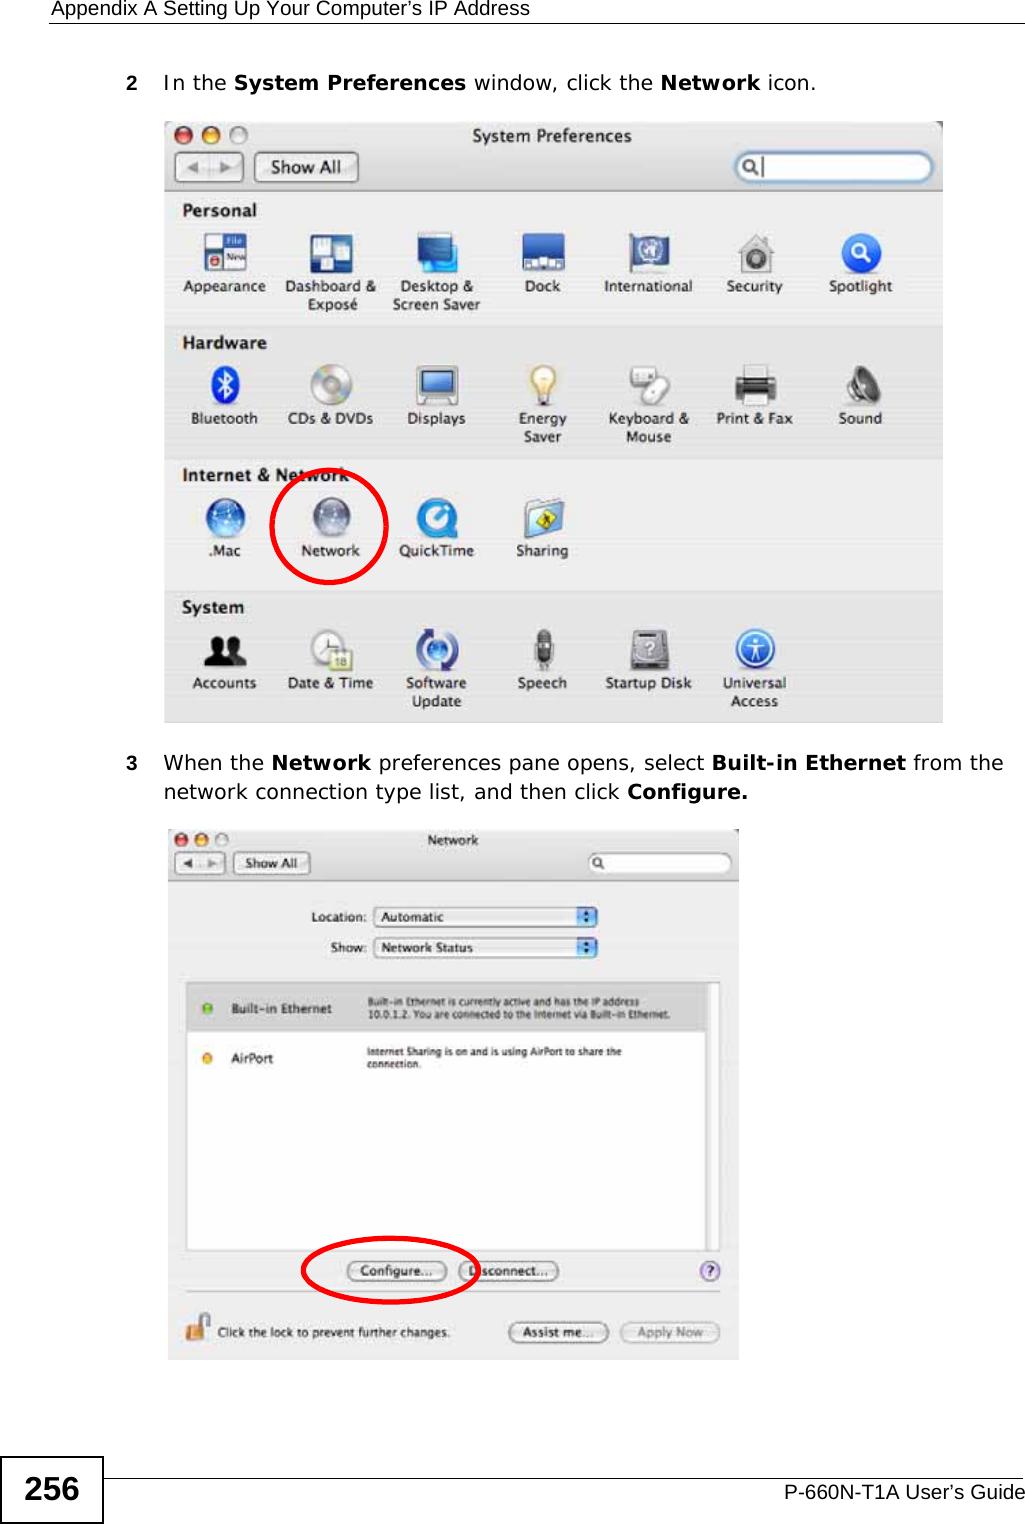 Appendix A Setting Up Your Computer’s IP AddressP-660N-T1A User’s Guide2562In the System Preferences window, click the Network icon.3When the Network preferences pane opens, select Built-in Ethernet from the network connection type list, and then click Configure.